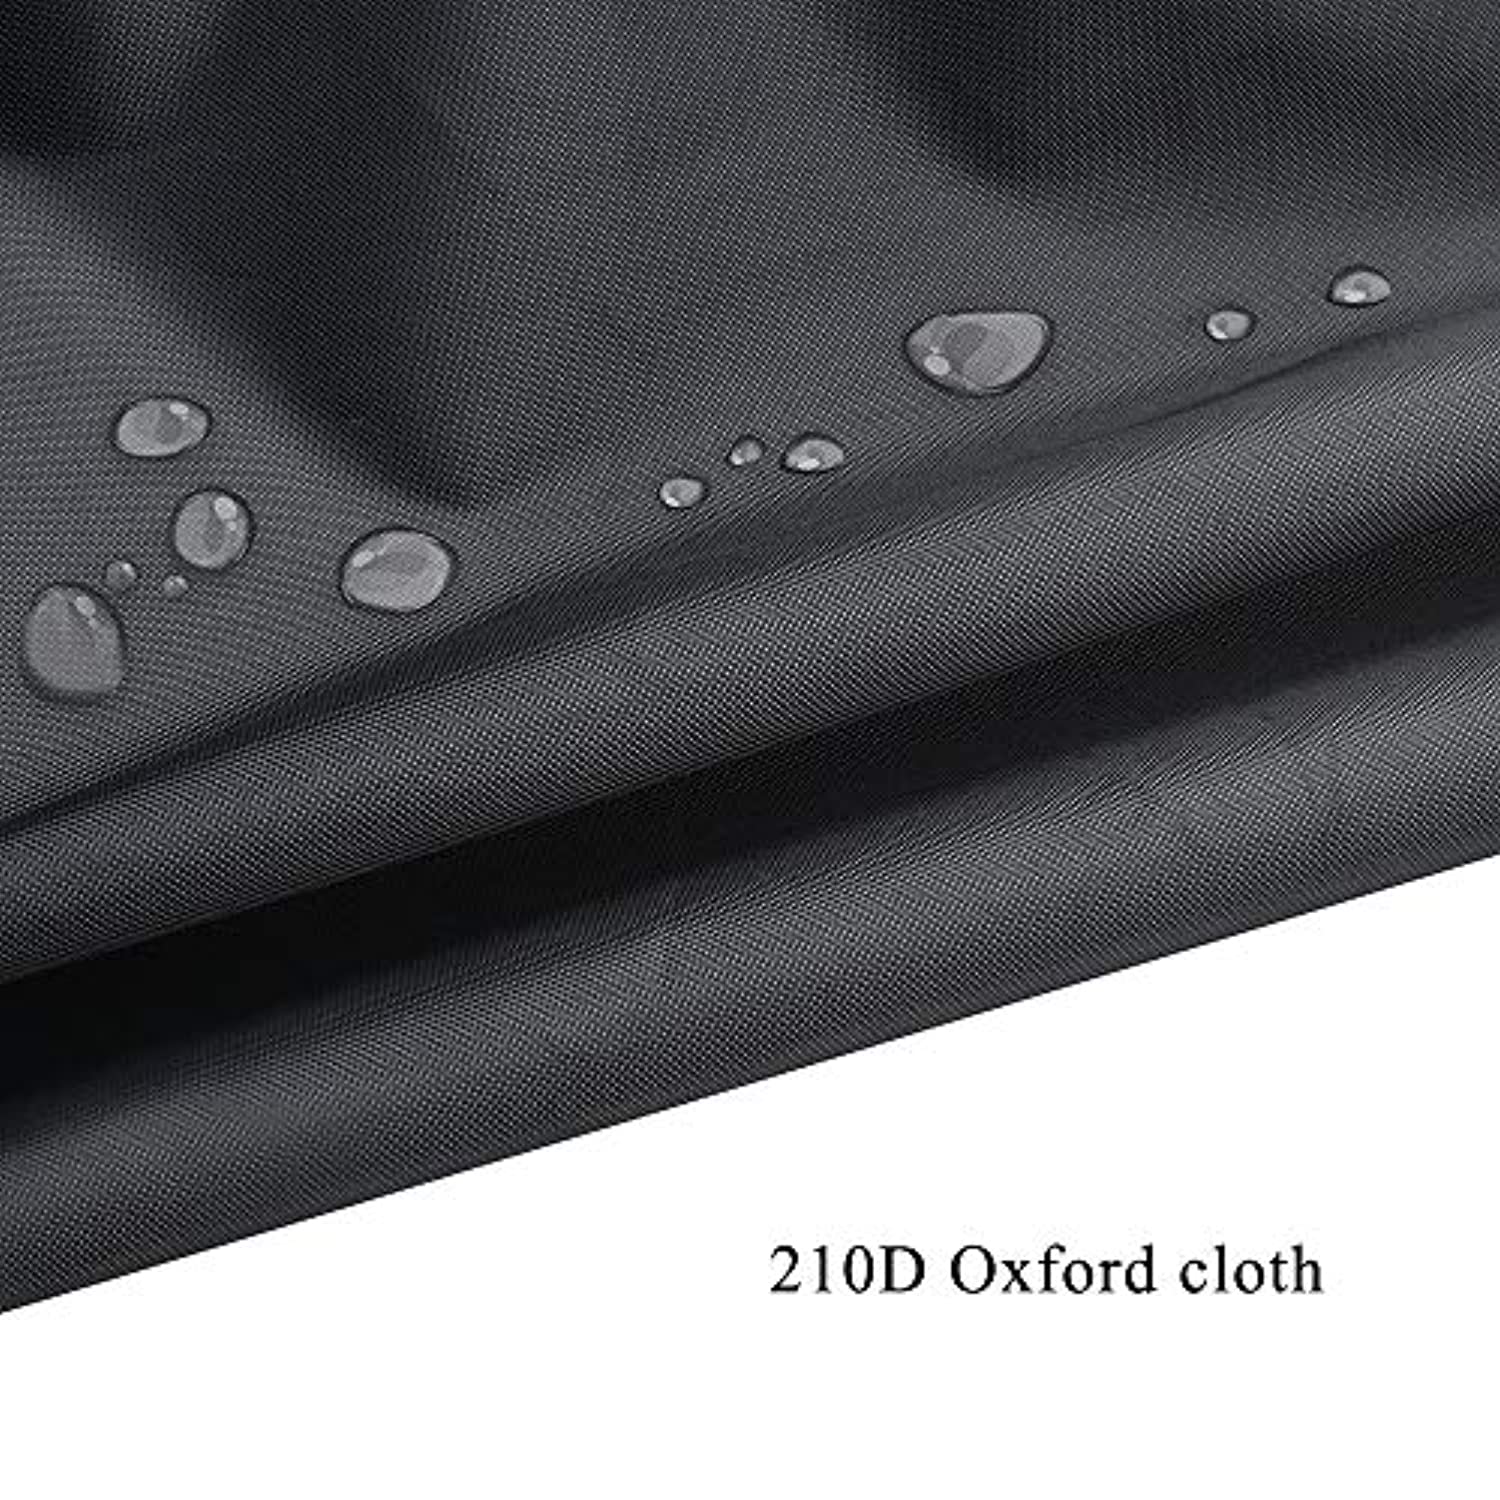 RIYIFER Non-Folding Treadmill Cover, Upgrade Heavy-Duty 210D Oxford Cloth Dustproof Waterproof Treadmill Protective Cover for Indoor Or Outdoor Use-Black